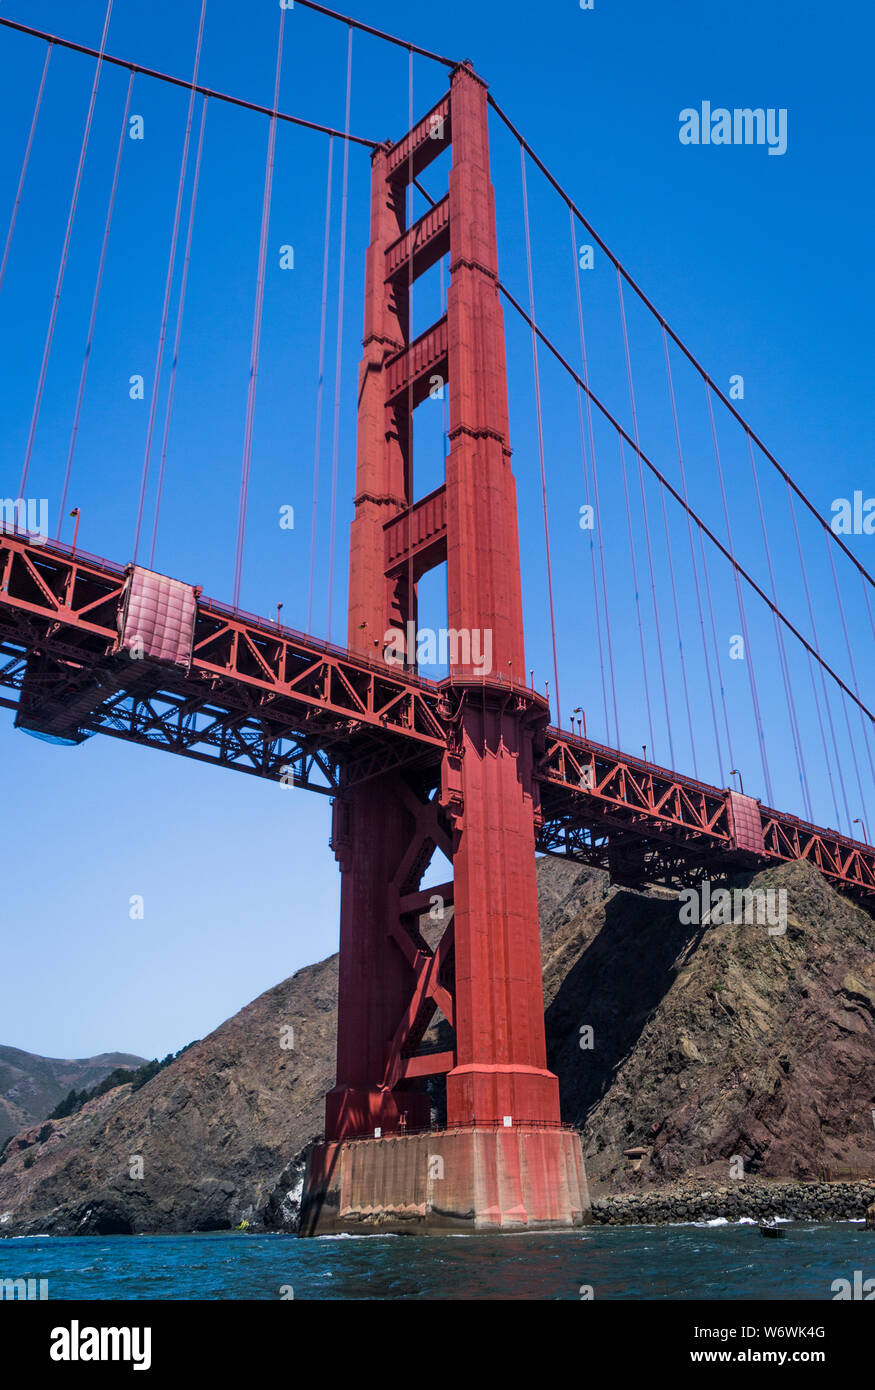 The Golden Gate Bridge viewed from below, looking toward the Marin, north, side. Stock Photo